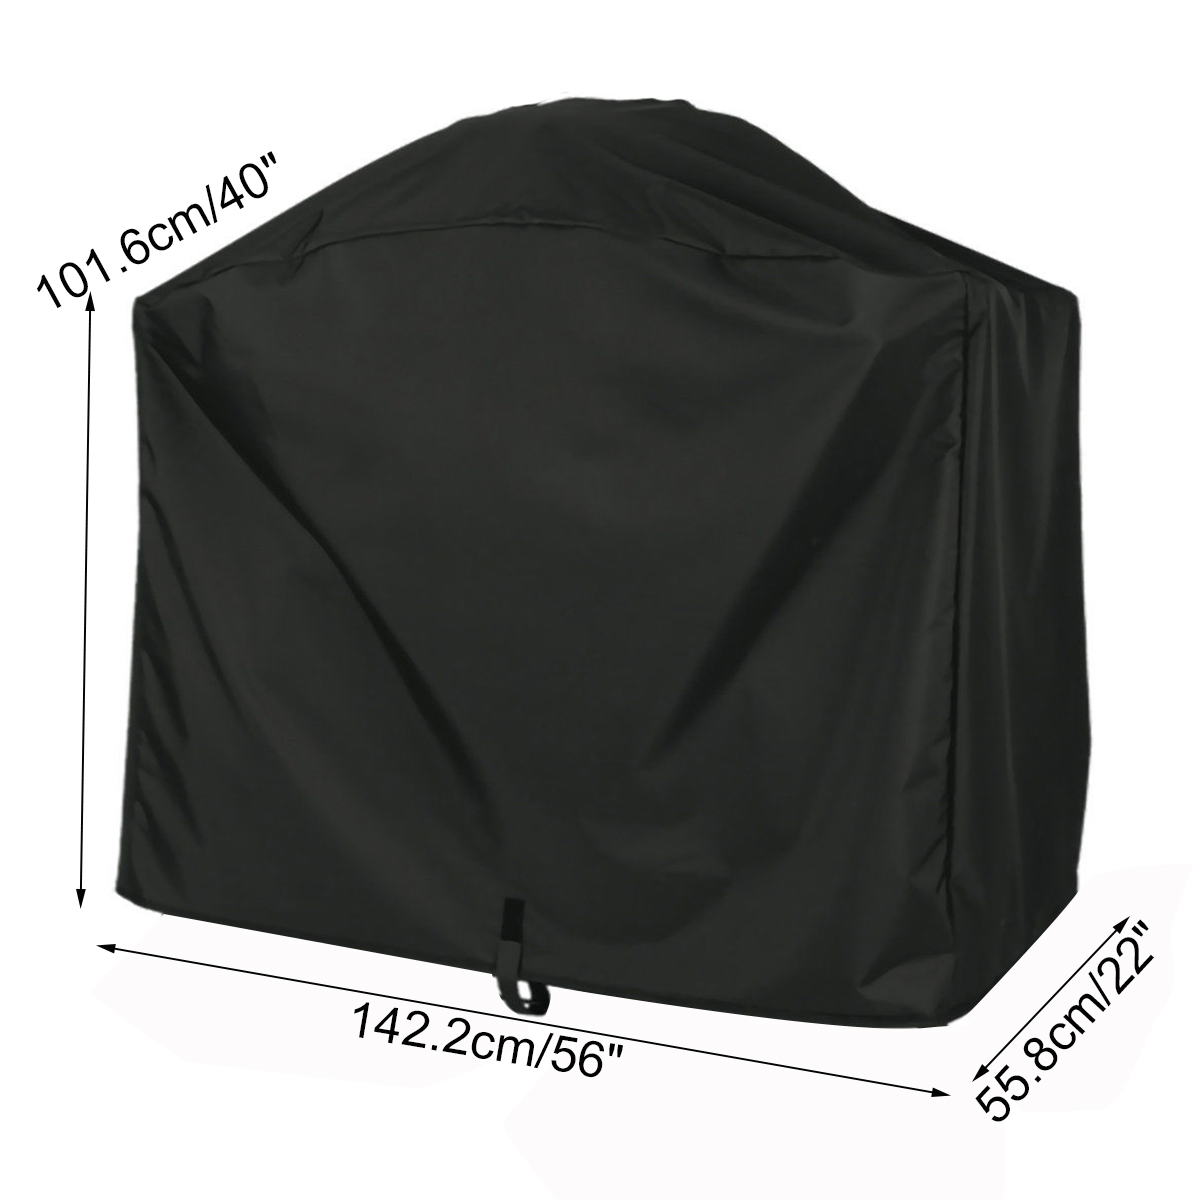 1422x558x1016-cm-BBQ-Grill-Cover-Waterproof-Anti-dust-Gas-Charcoal-Barbecue-Protector-Outdoor-Campin-1711679-2